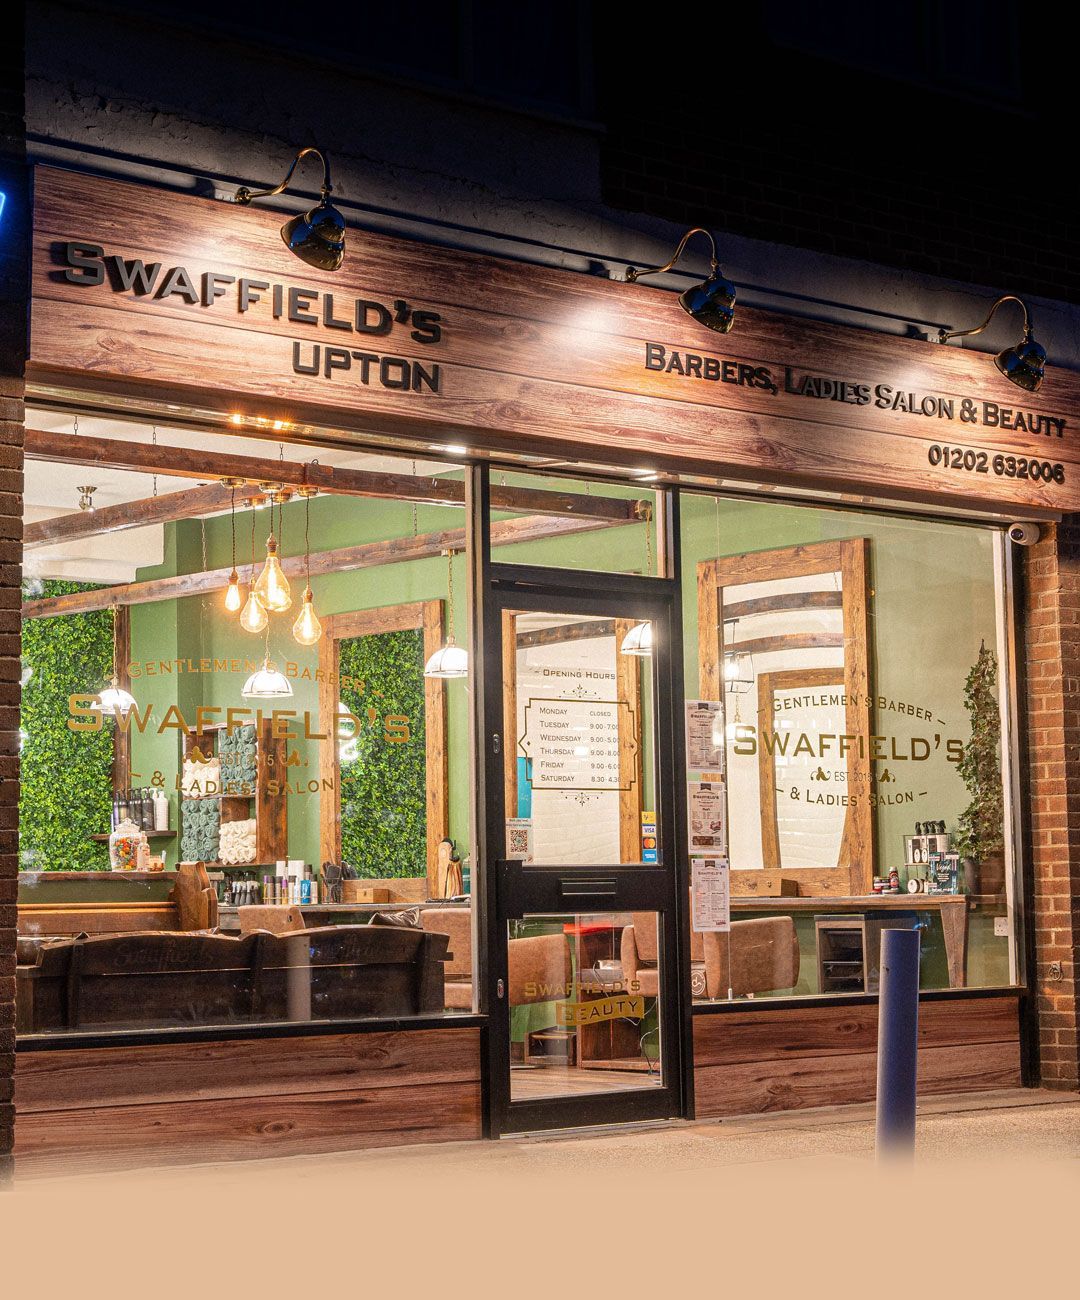 swaffields of upton barbers beauty and hair salon